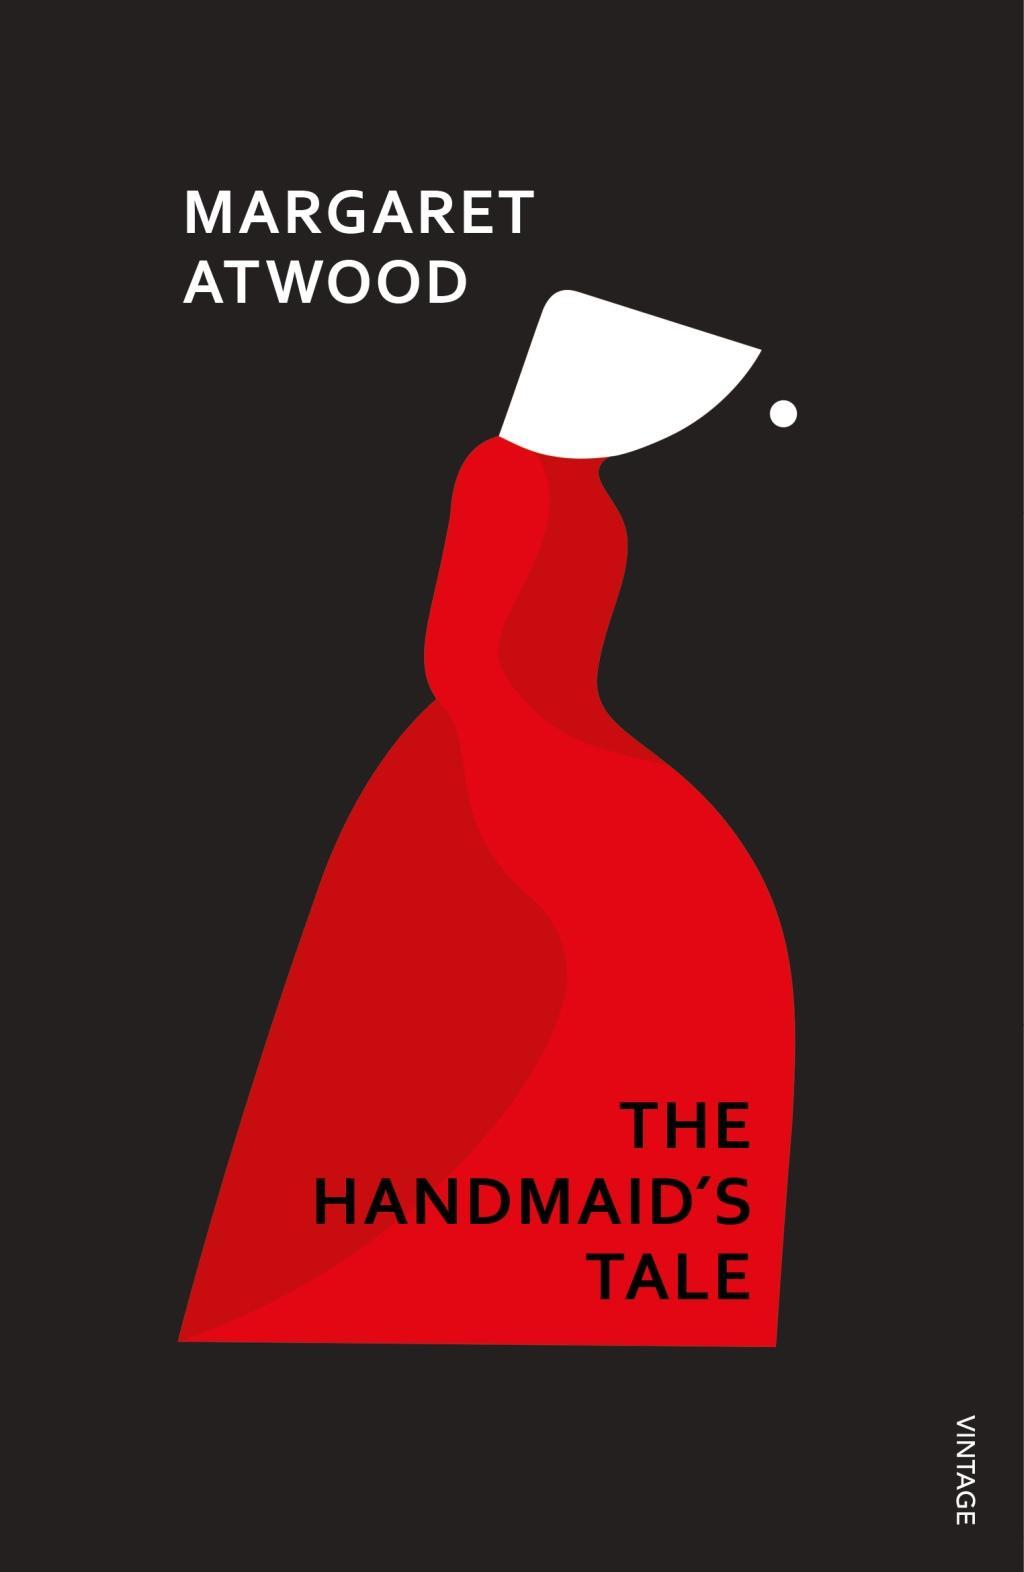 The Handmaid's Tale / Margaret Atwood / Taschenbuch / The Handmaid's Tale / B-format paperback / 324 S. / Englisch / 1996 / Random House UK Ltd / EAN 9780099740919 - Atwood, Margaret